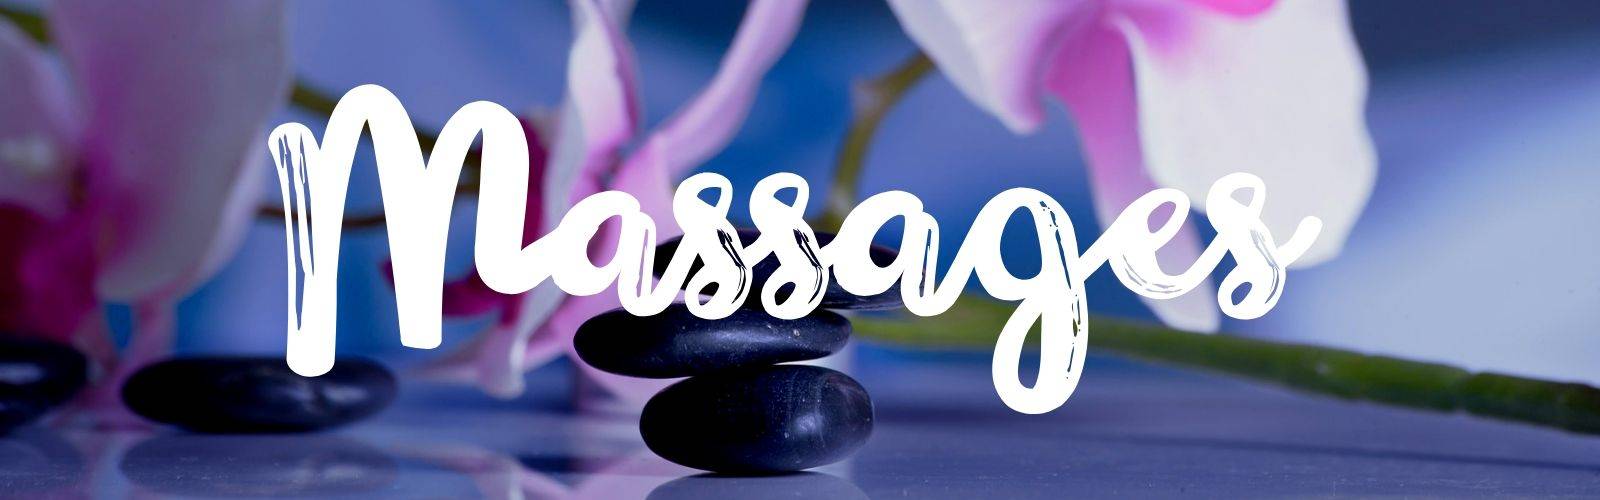 Hot Springs Massages and Massage Hot Springs, Best Massage in Hot Springs | Thai-Me Spa | Massage Hot Springs downtown, Bathhouses Hot Springs